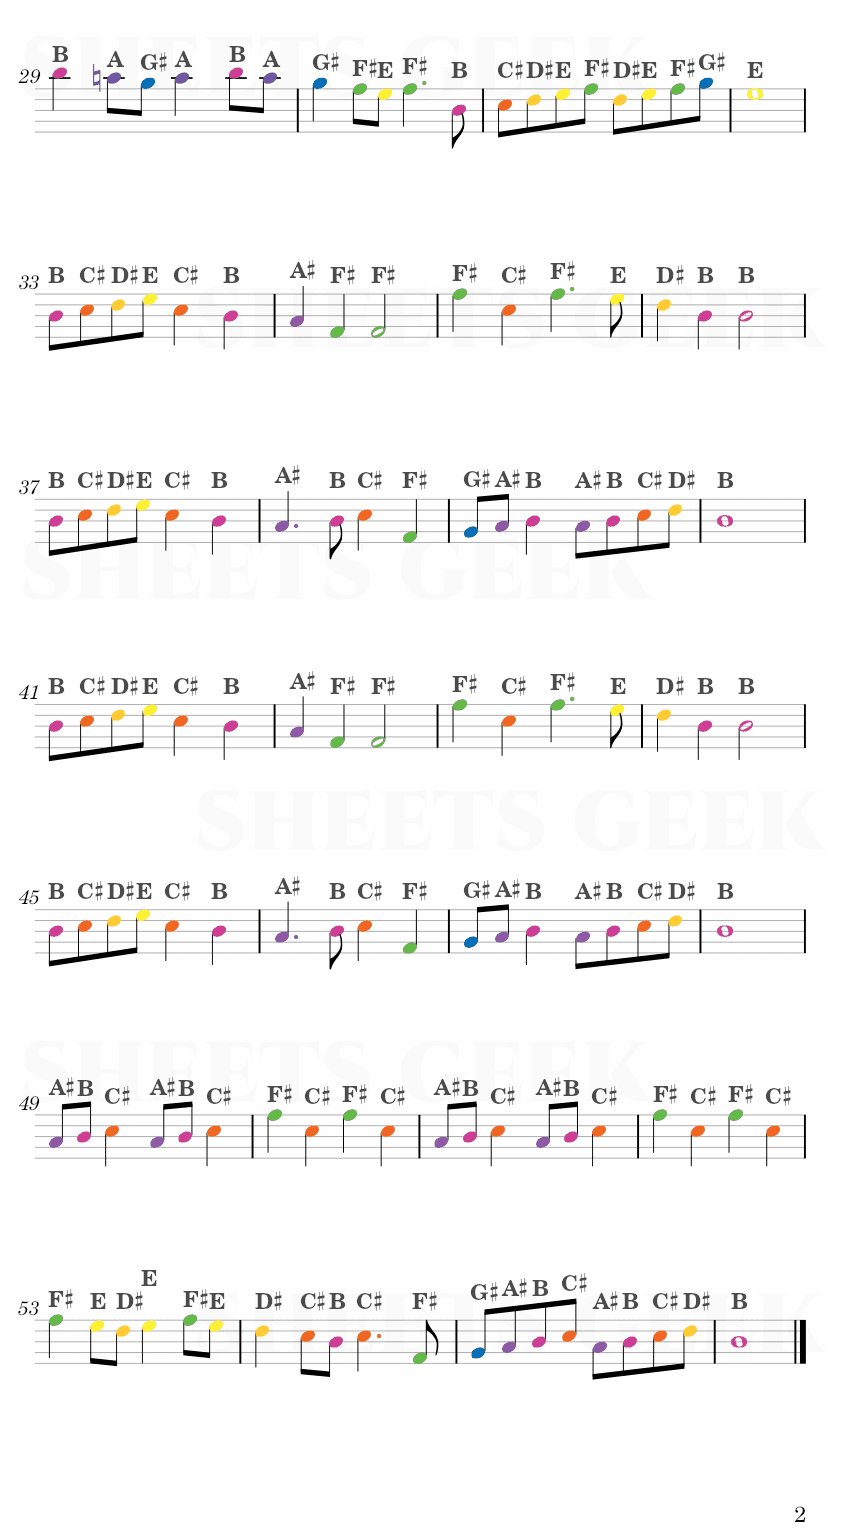 Derek's Tune (Argeers) - Barbie 12 Dancing Princesses Easy Sheet Music Free for piano, keyboard, flute, violin, sax, cello page 2